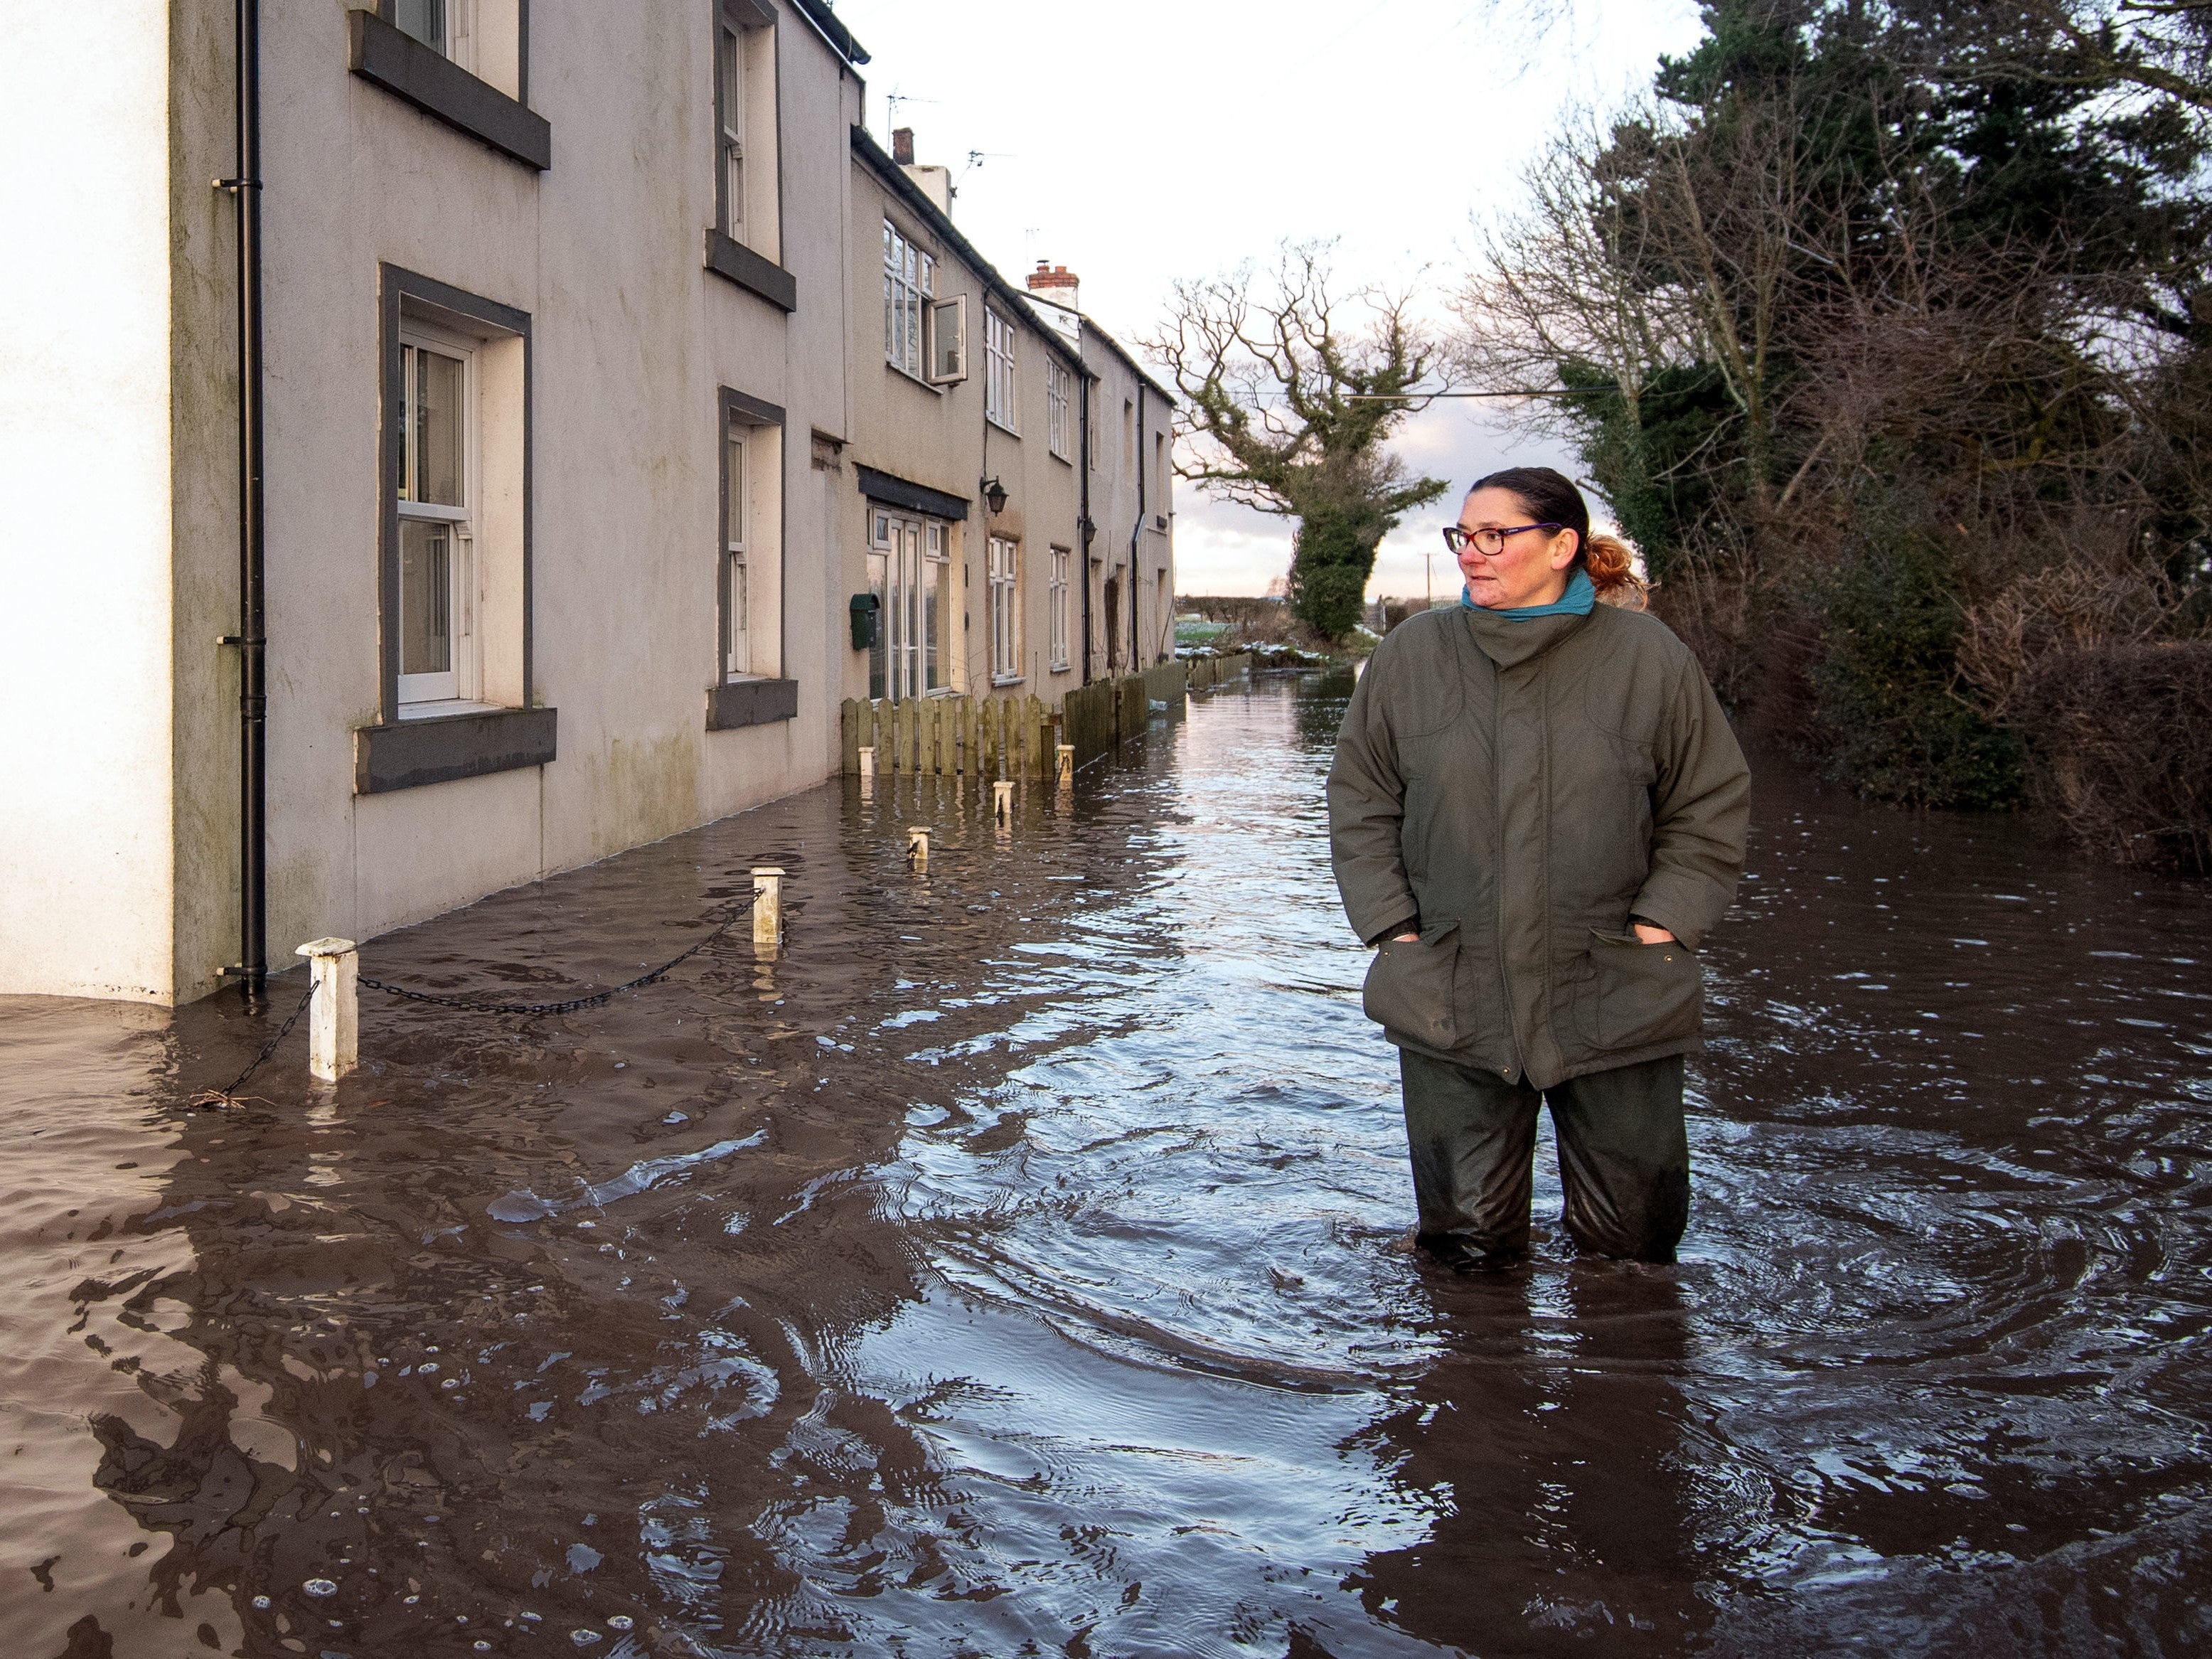 Gabrielle Burns-Smith outside her flooded home on the outskirts in Lymm